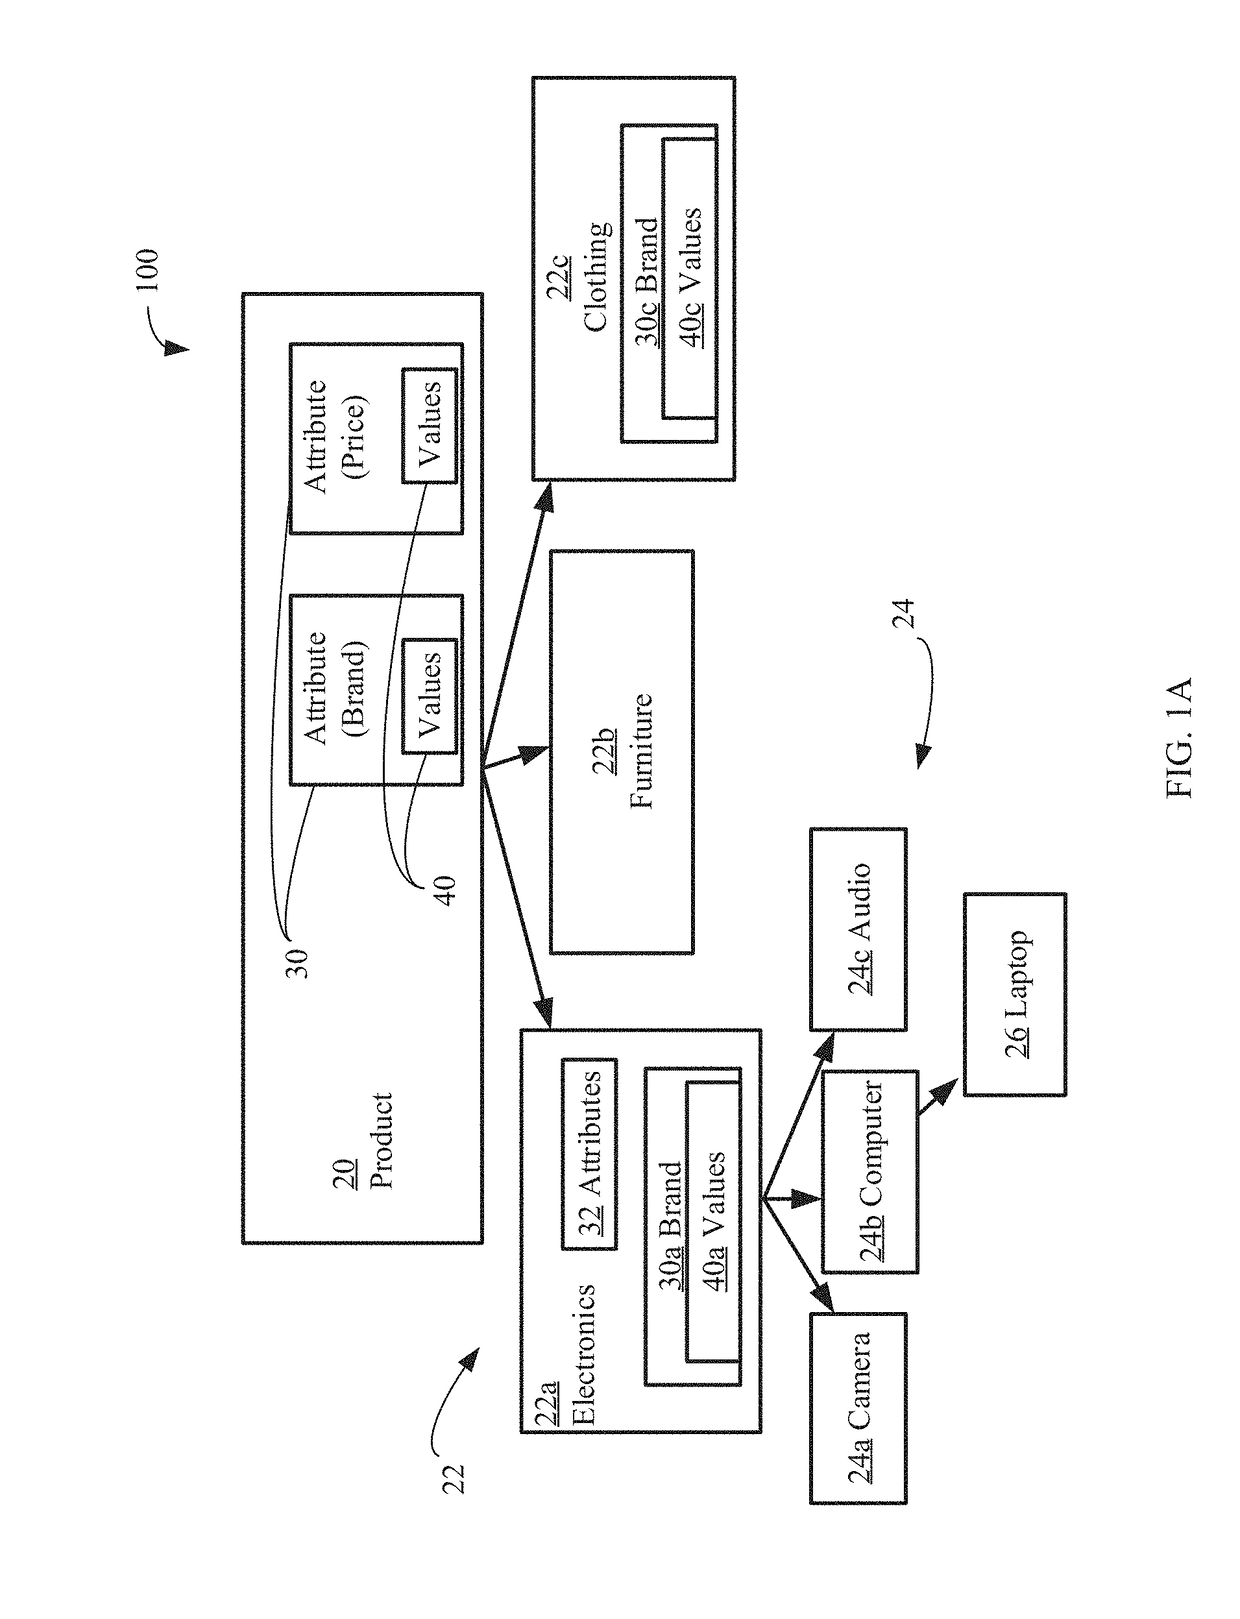 Systems and methods for computation of a semantic representation